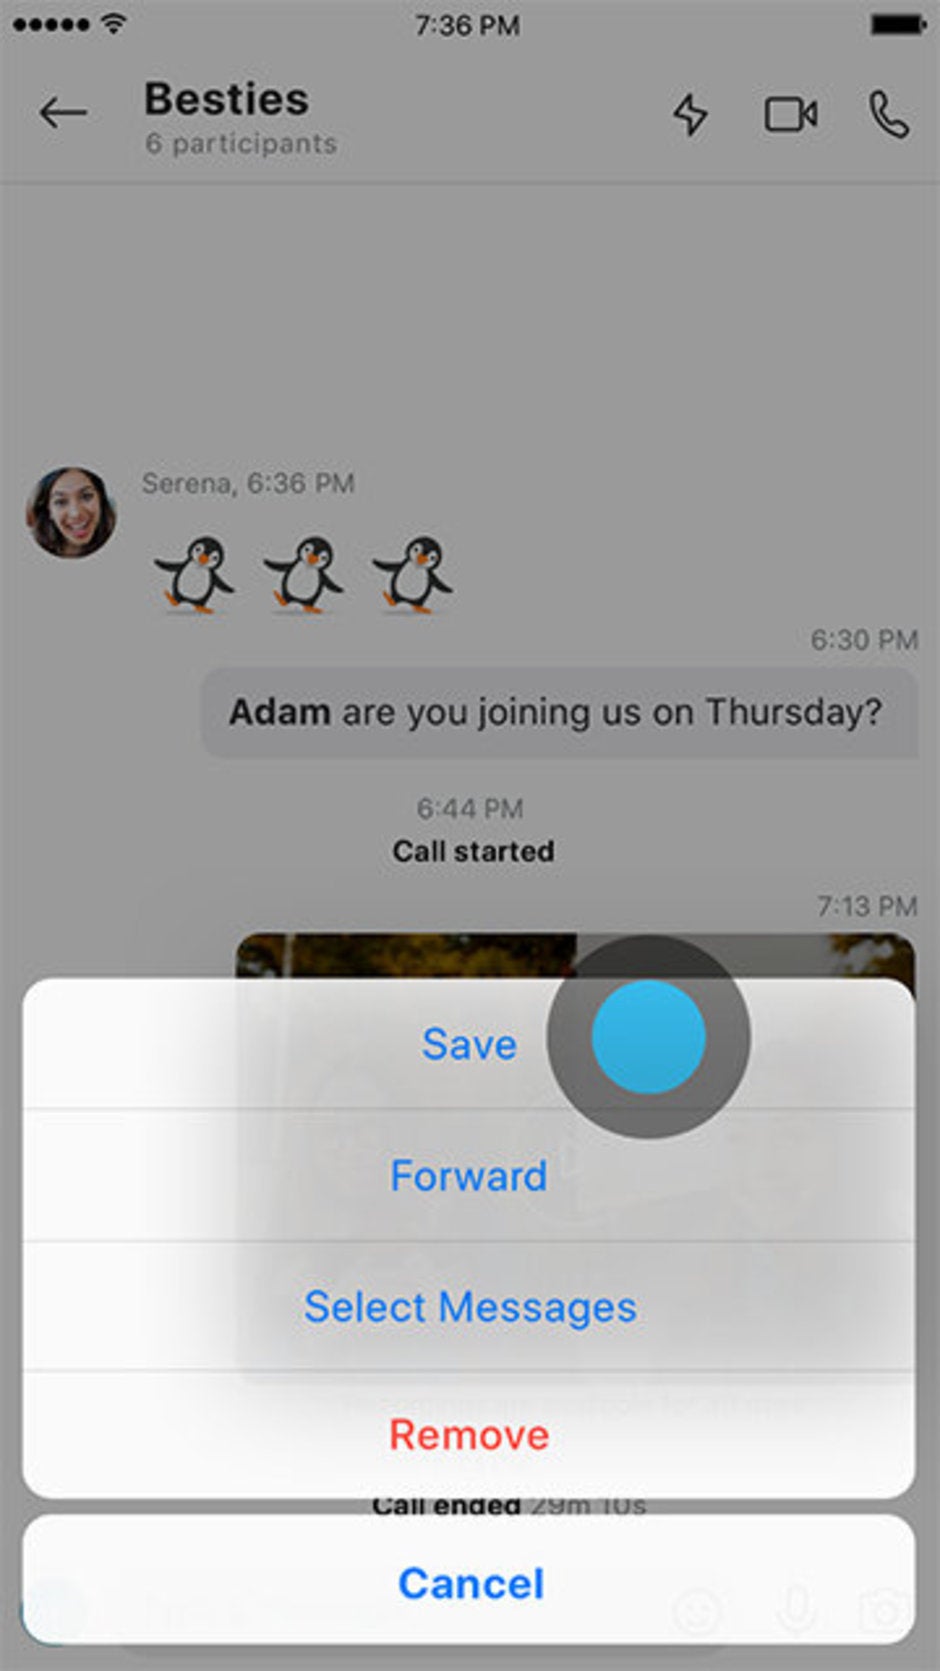 Save your recorded call with a tap of a button - Microsoft starts rolling out Skype call recording to Android and iOS devices